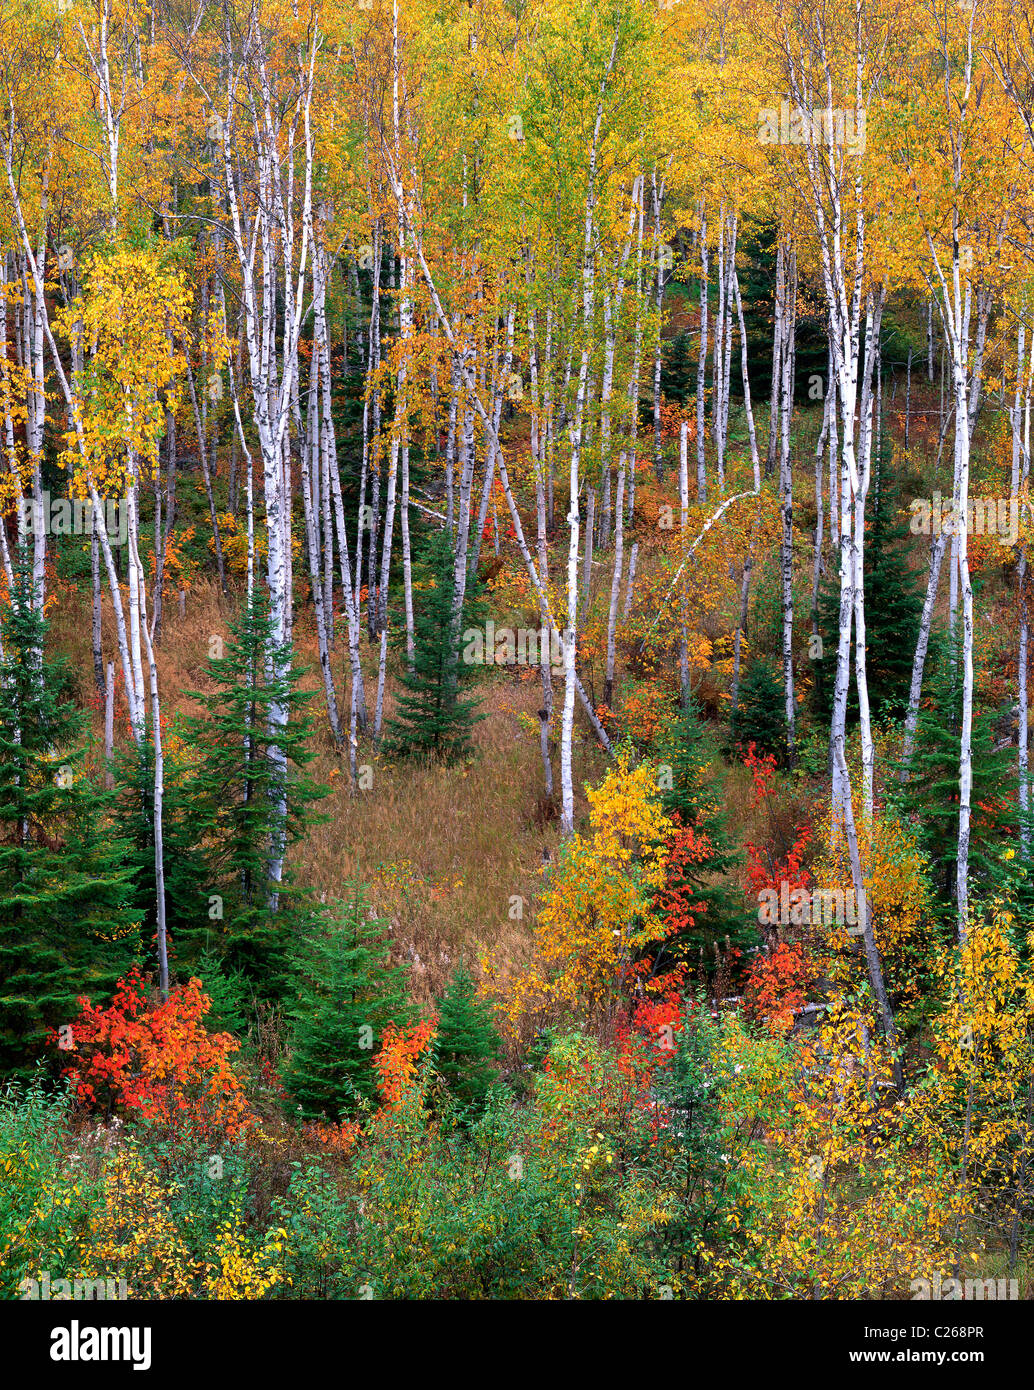 Mixed Coniferous Deciduous Forest of White Birch Maples Fir & Spruce trees autumn northern Minnesota USA, by Gary A Nelson/Dembinsky Photo Assoc Stock Photo